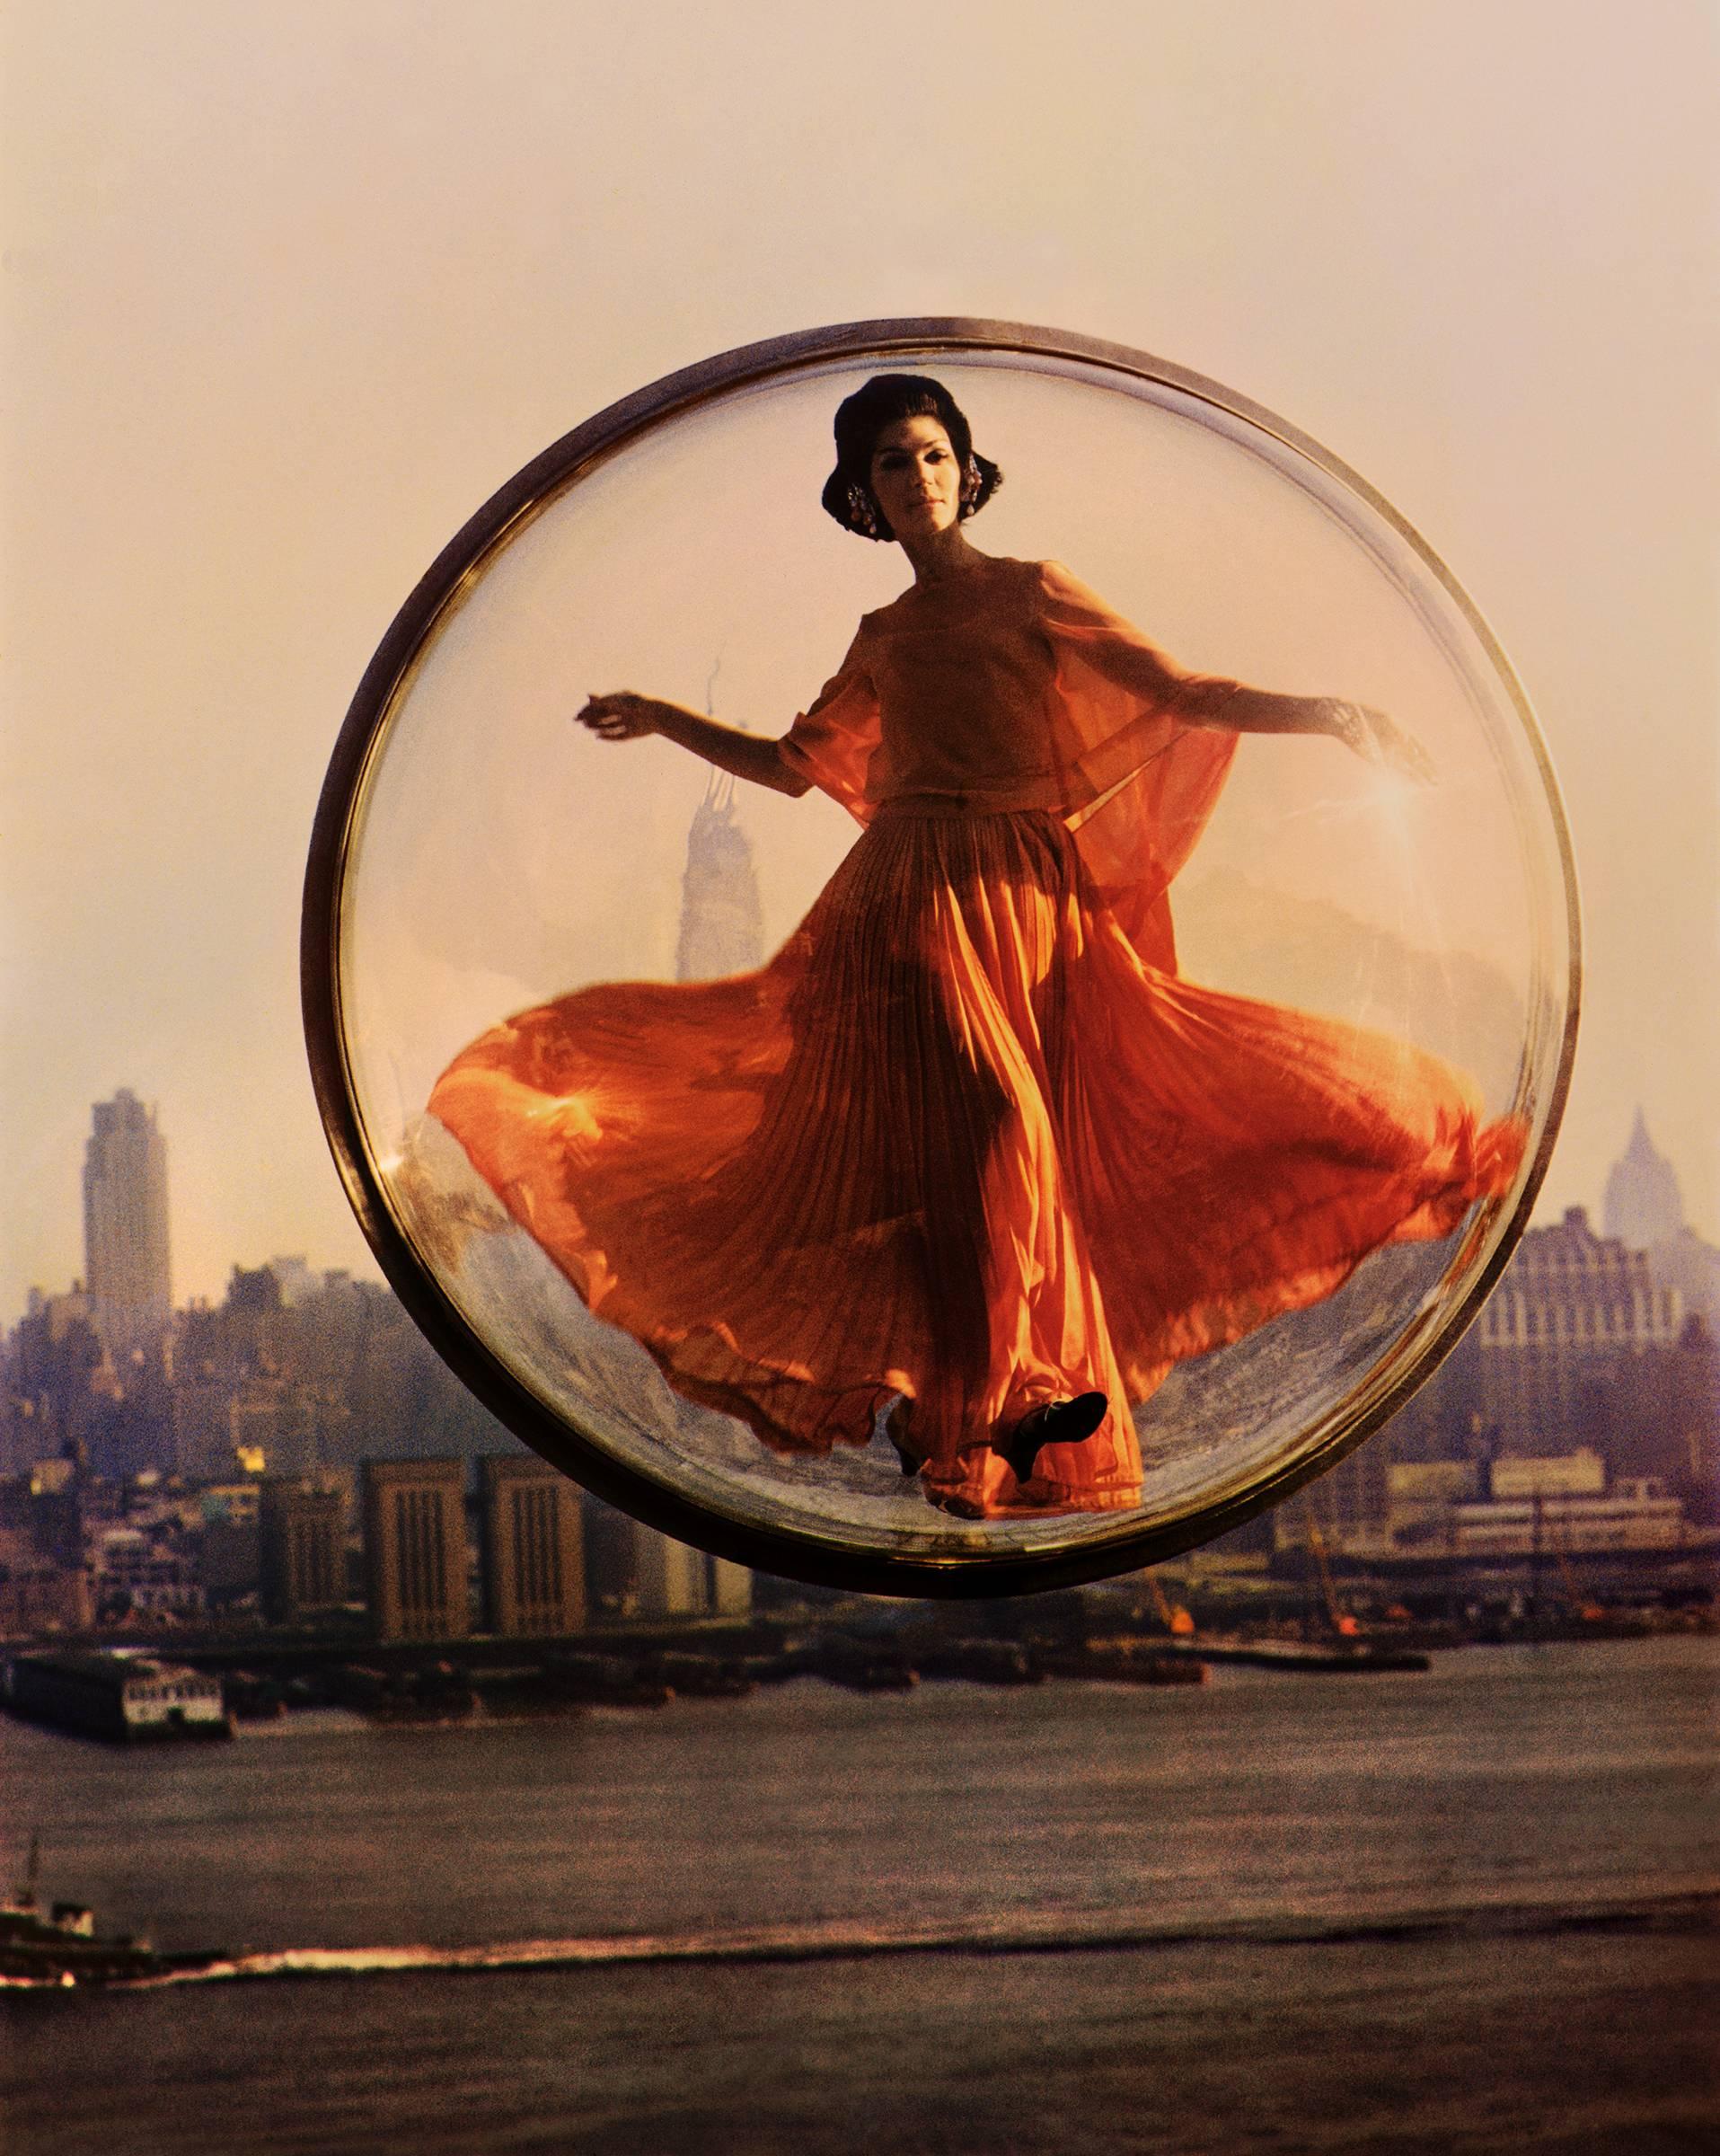 Over New York - Melvin Sokolsky (Colour Photography)
Signed on photographer's label on reverse of mount
Archival pigment print, mounted on aluminium
37 x 30 inches
from an edition of 25 + 3 APS
Image taken 1963, edition printed 2017

Melvin Sokolsky